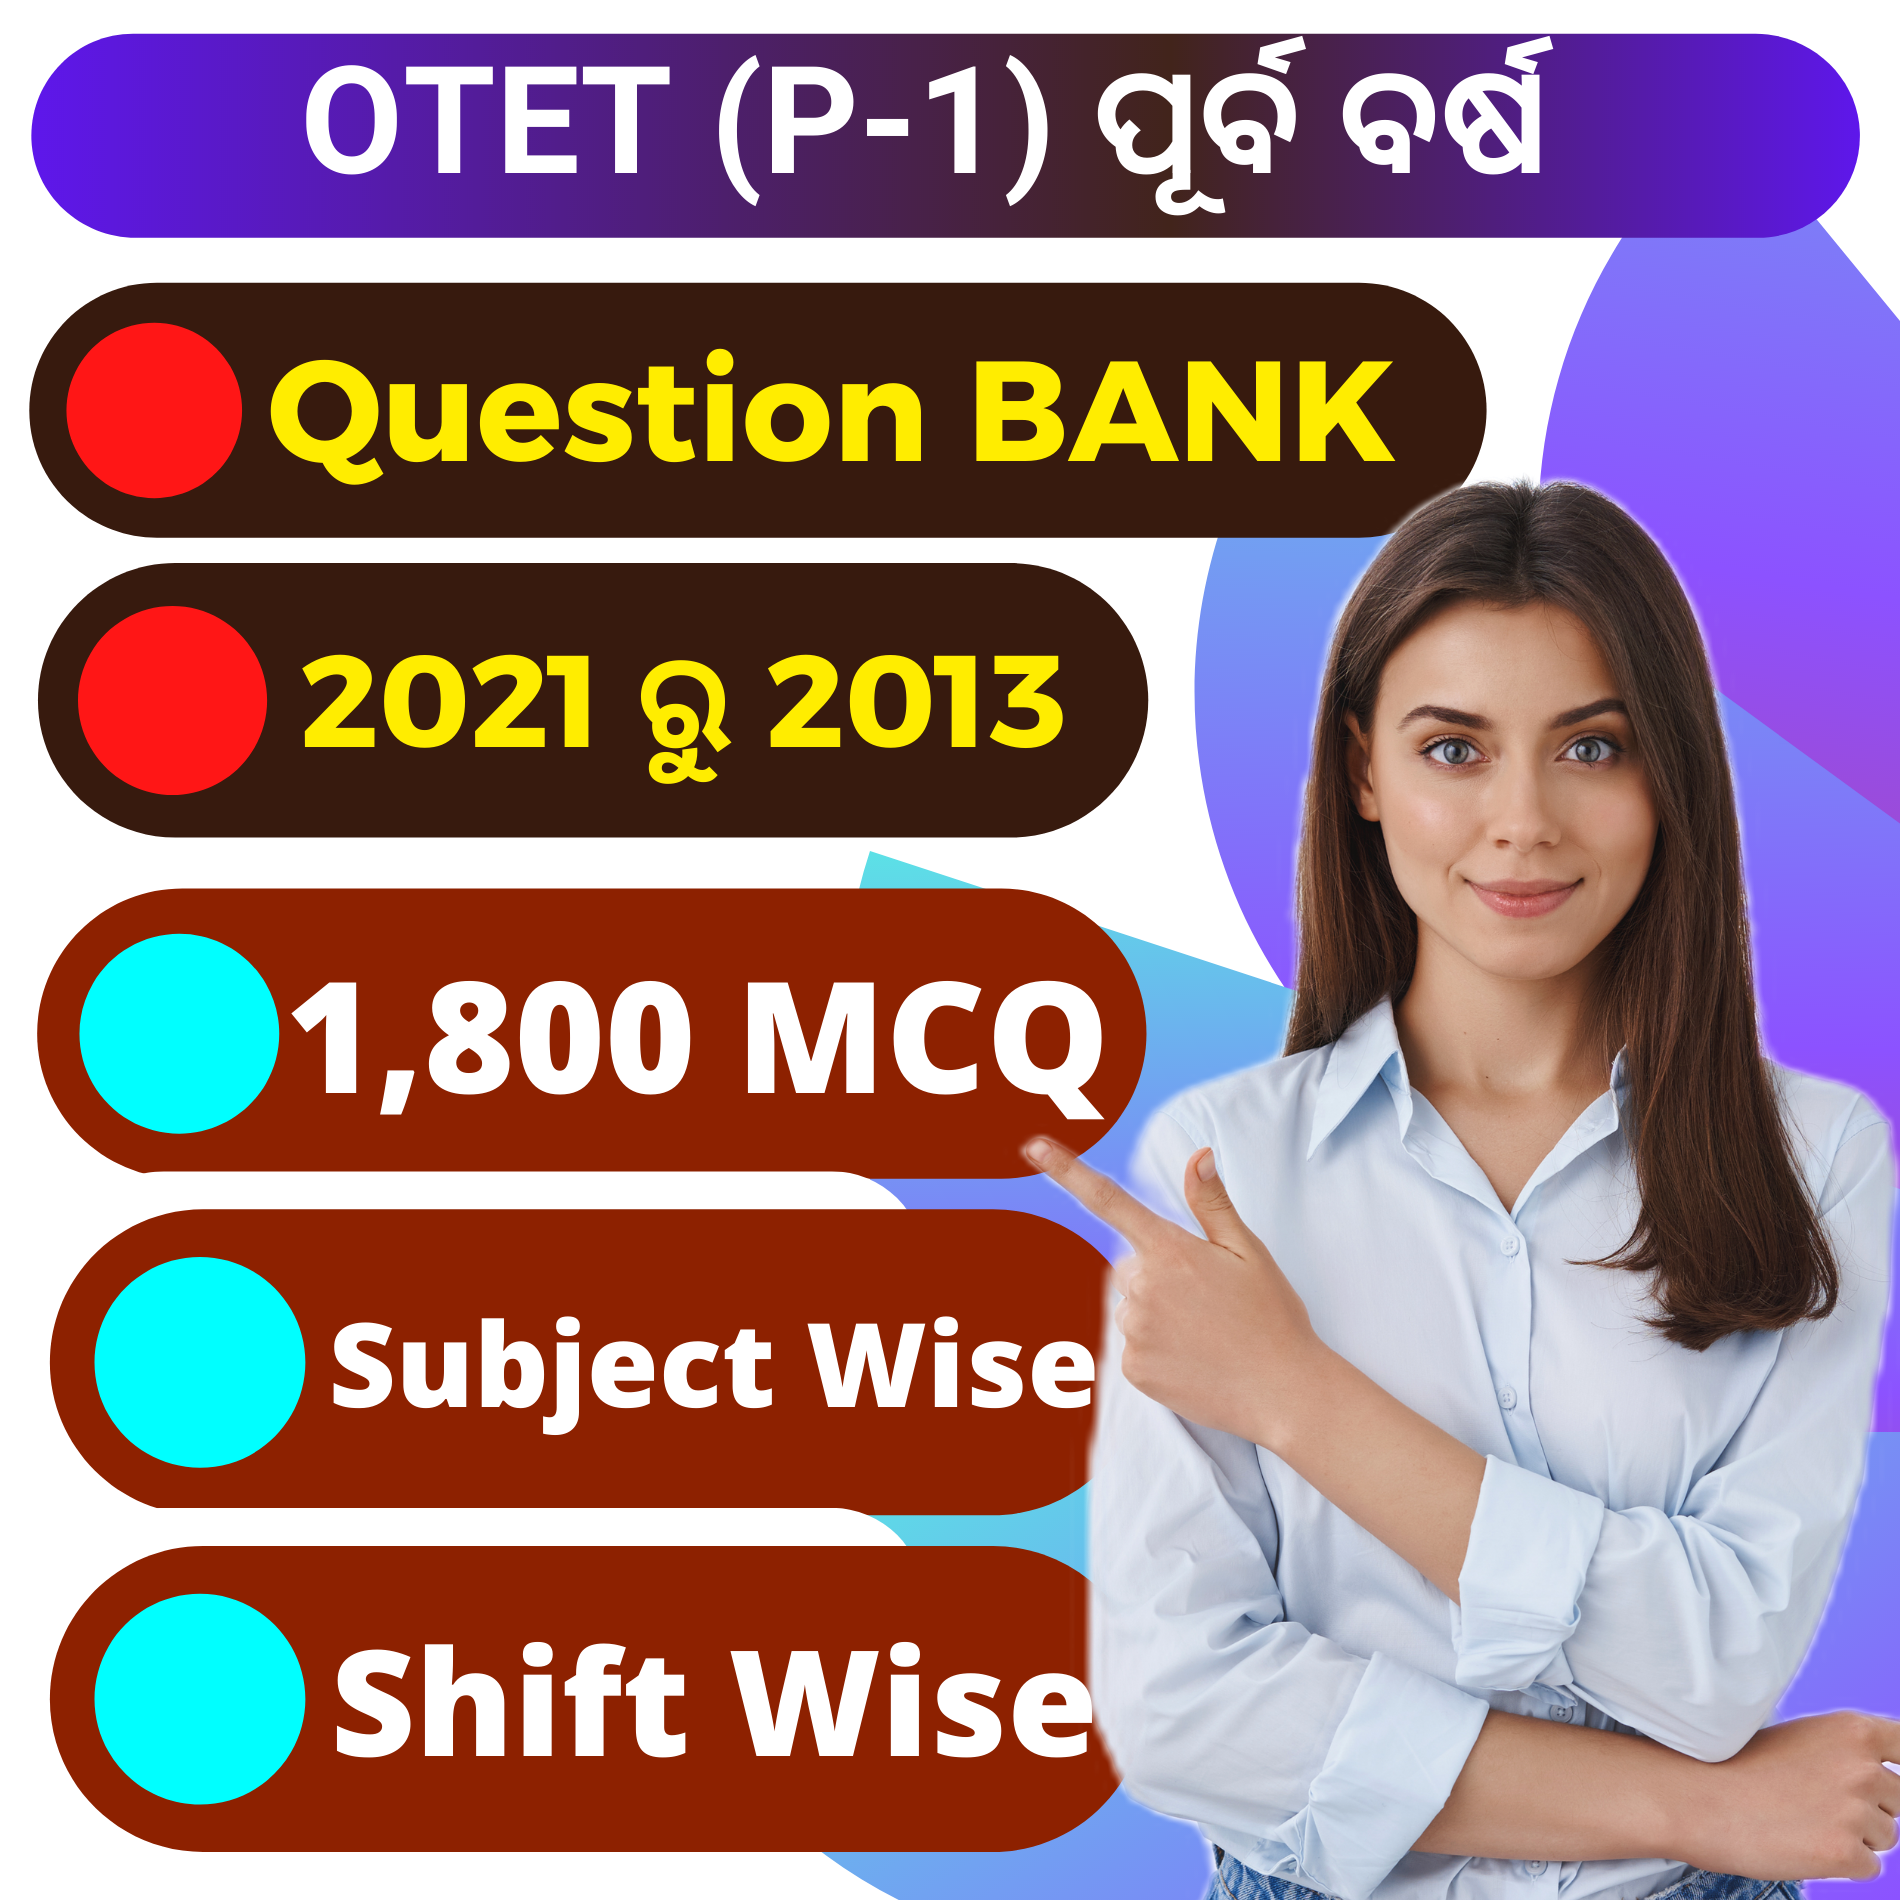 T- CT EXAM 2024 !! E-BOOK (PDF) 25,000 BEST MCQ & 5 FULL TEST !! CHAPTER WISE NEW QUESTION & PREVIOUS YEAR ALL QUESTIONS & ANSWER